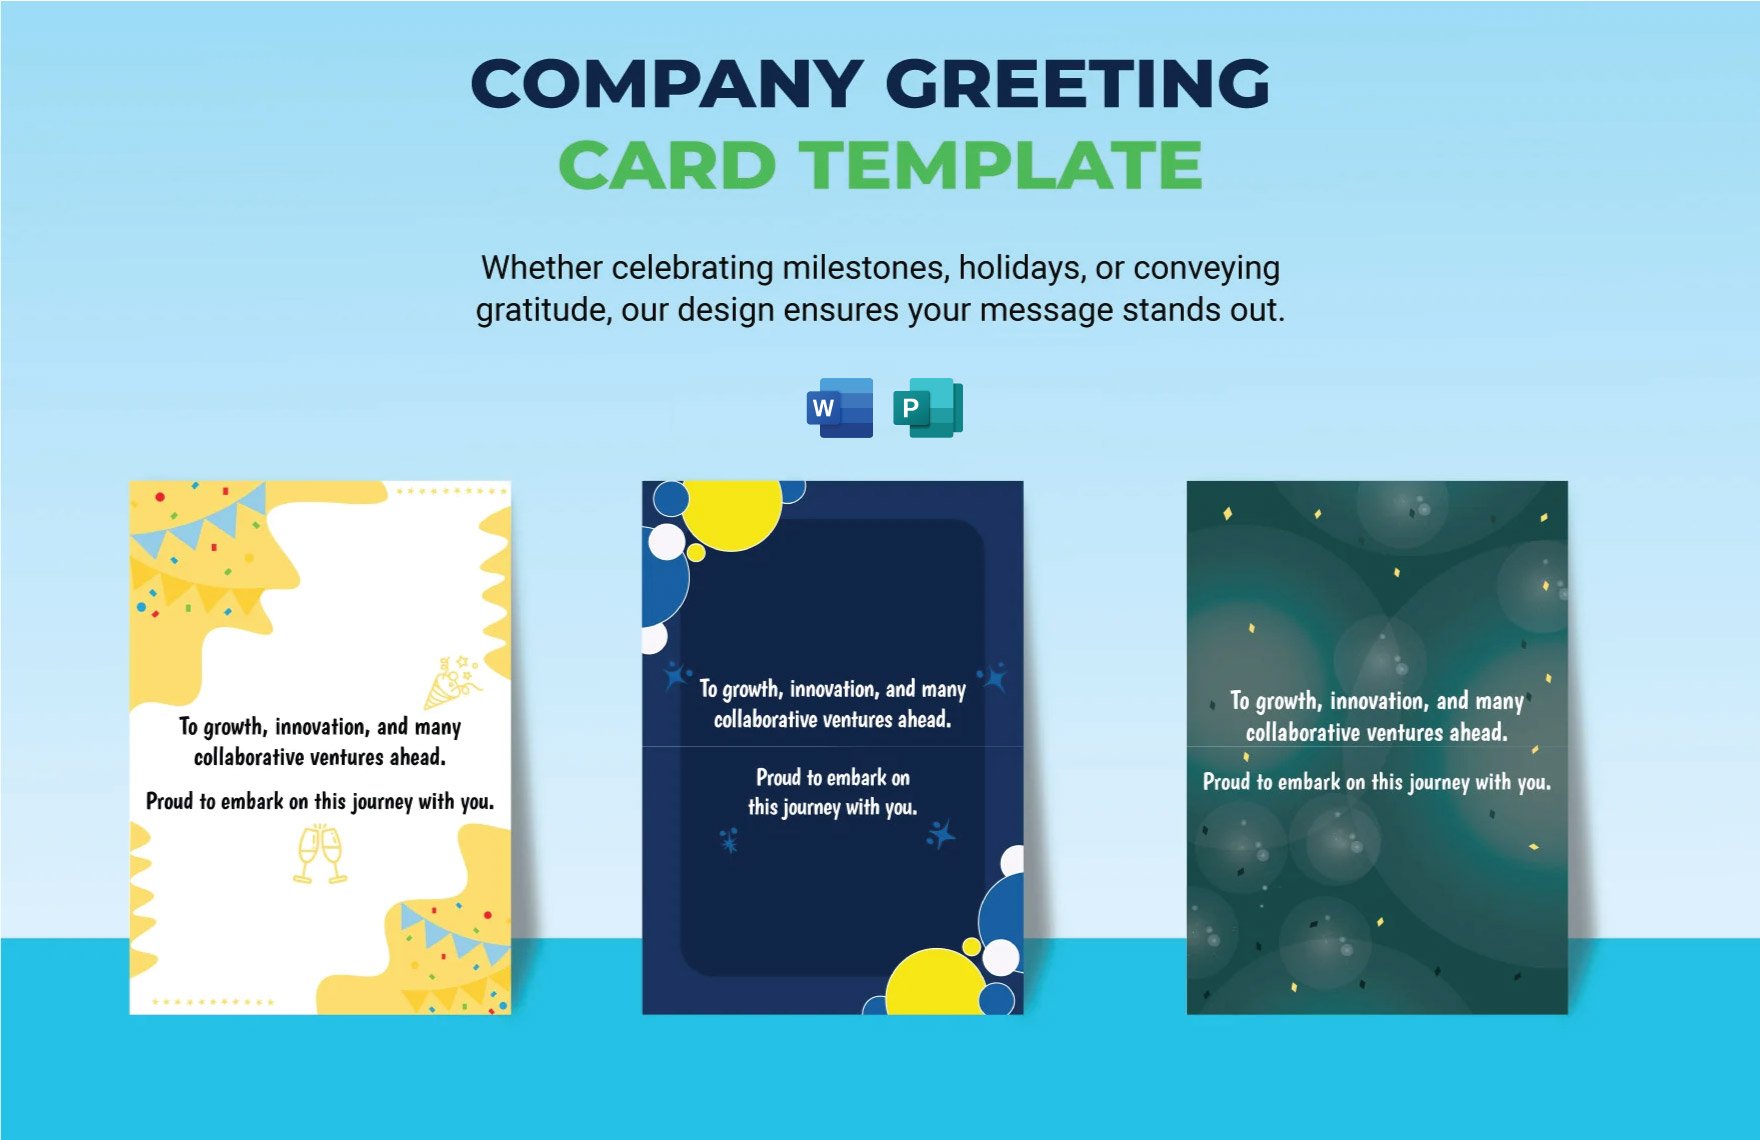 Company Greeting Card Template in Word, Publisher